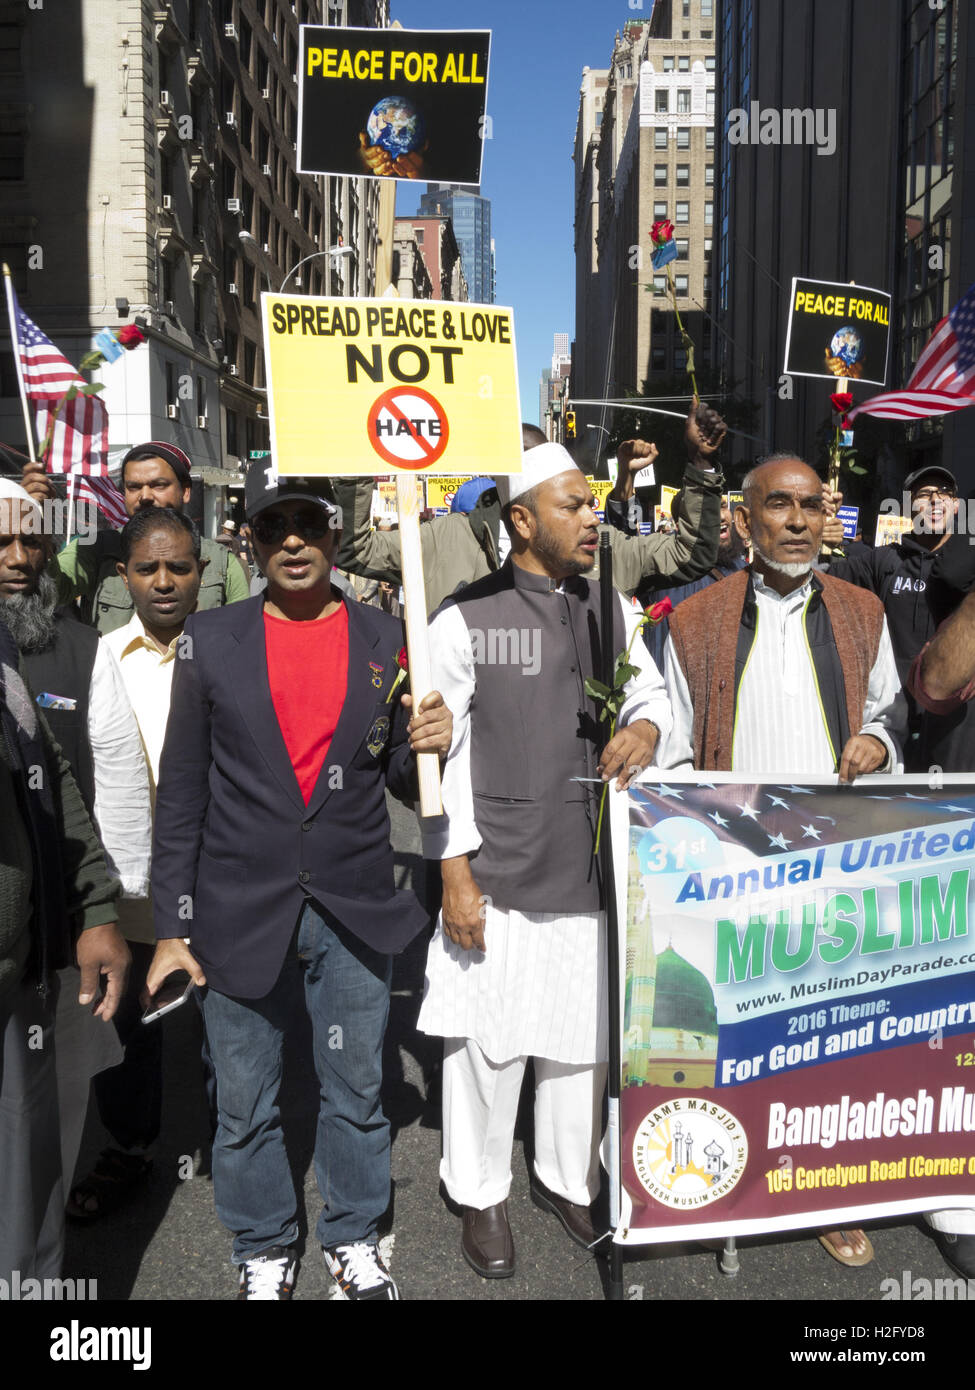 Bangladeshis march in American Muslim Day Parade in New York City, 2016. Stock Photo